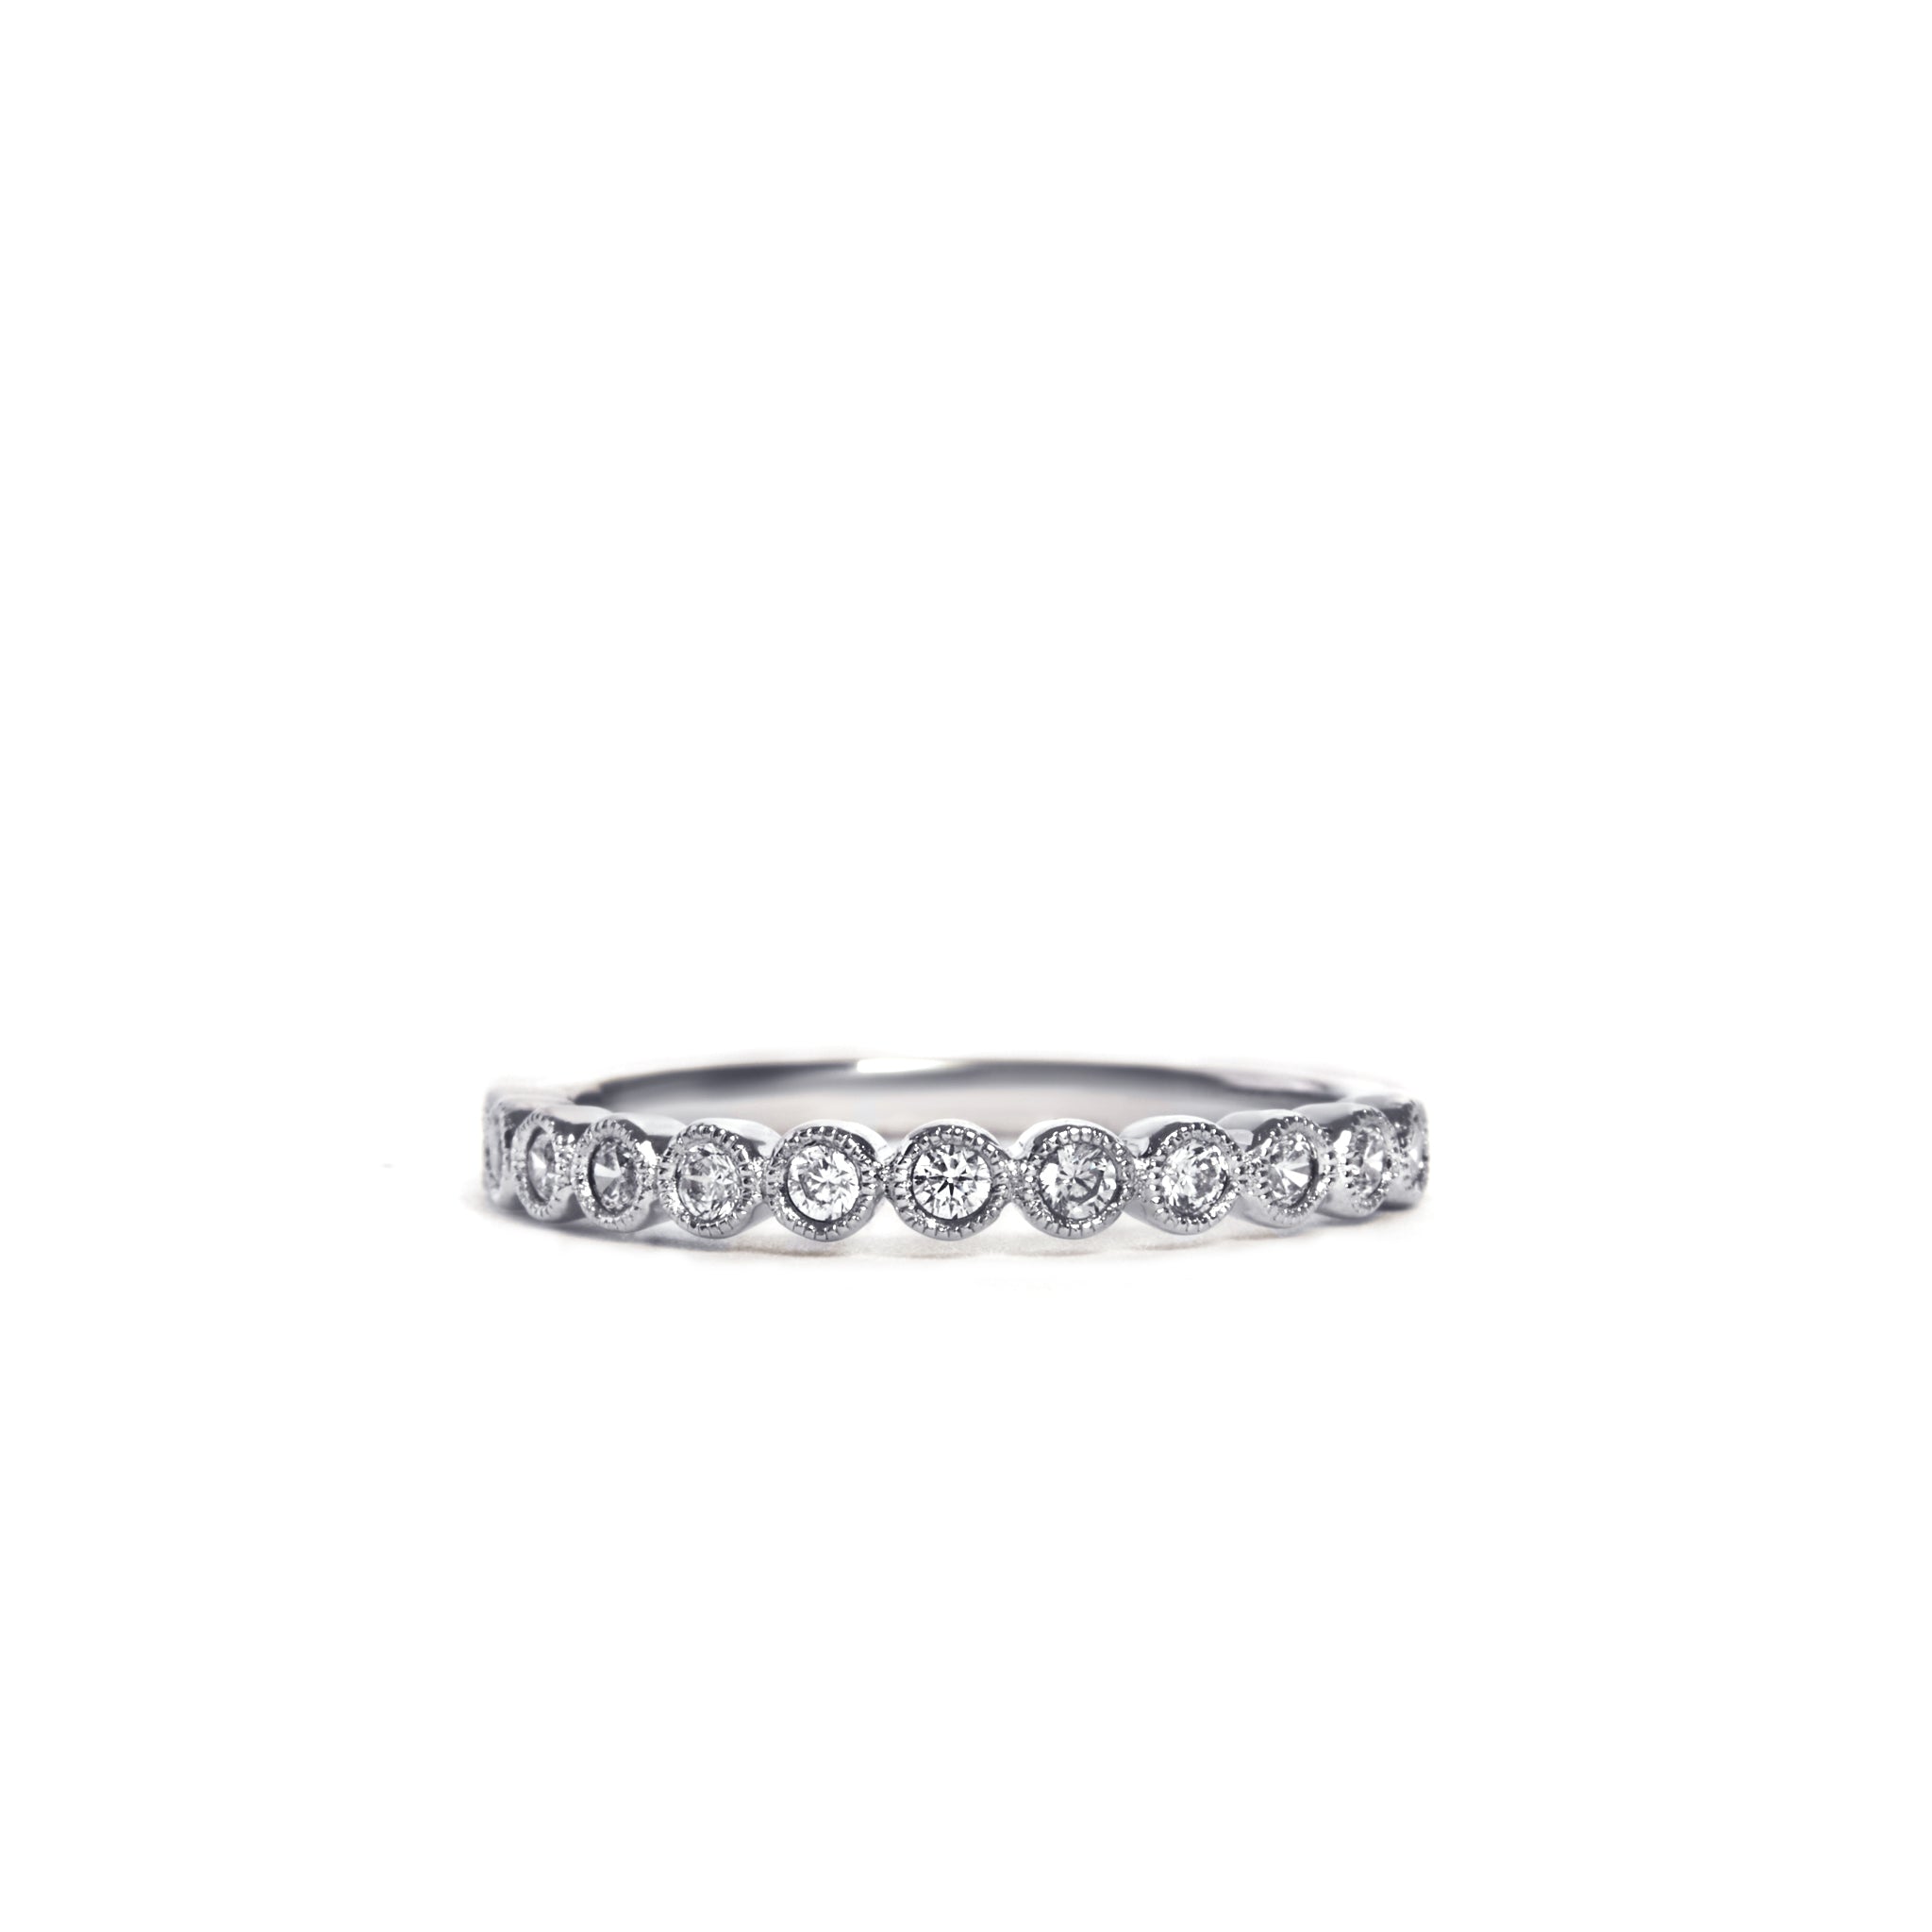 Exquisite 9ct White Gold Bezel Set Diamond Ring, featuring delicate 0.25ct Round Brilliant Cut Natural Diamonds in a millgrain bezel setting. Available in Yellow Gold and Platinum. Showcase elegance with G/H color and SI clarity diamonds